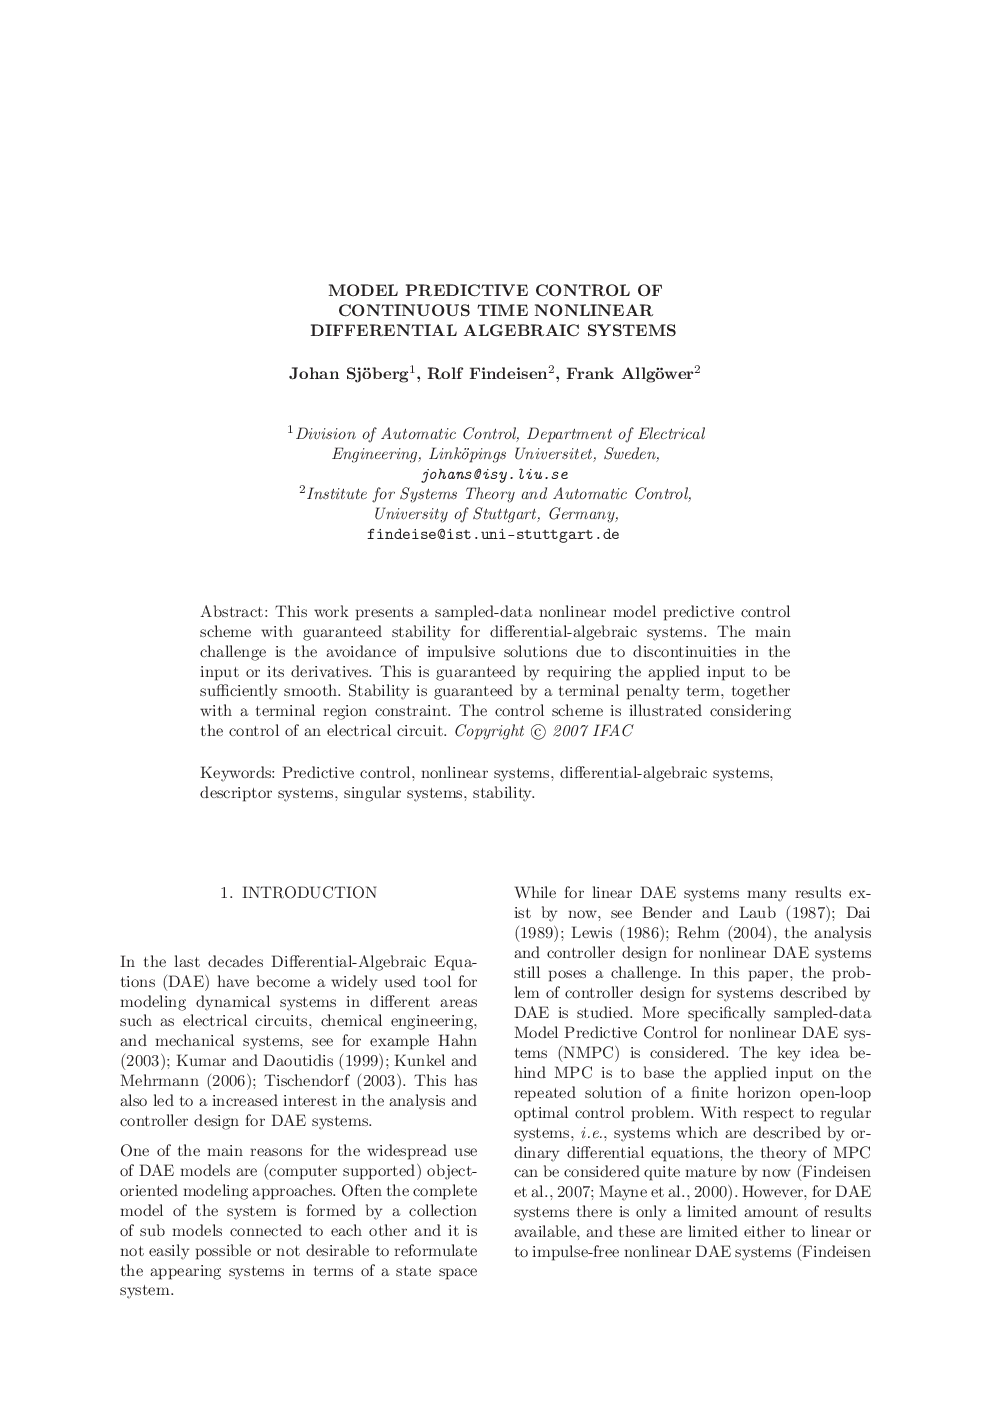 MODEL PREDICTIVE CONTROL OF CONTINUOUS TIME NONLINEAR DIFFERENTIAL ALGEBRAIC SYSTEMS